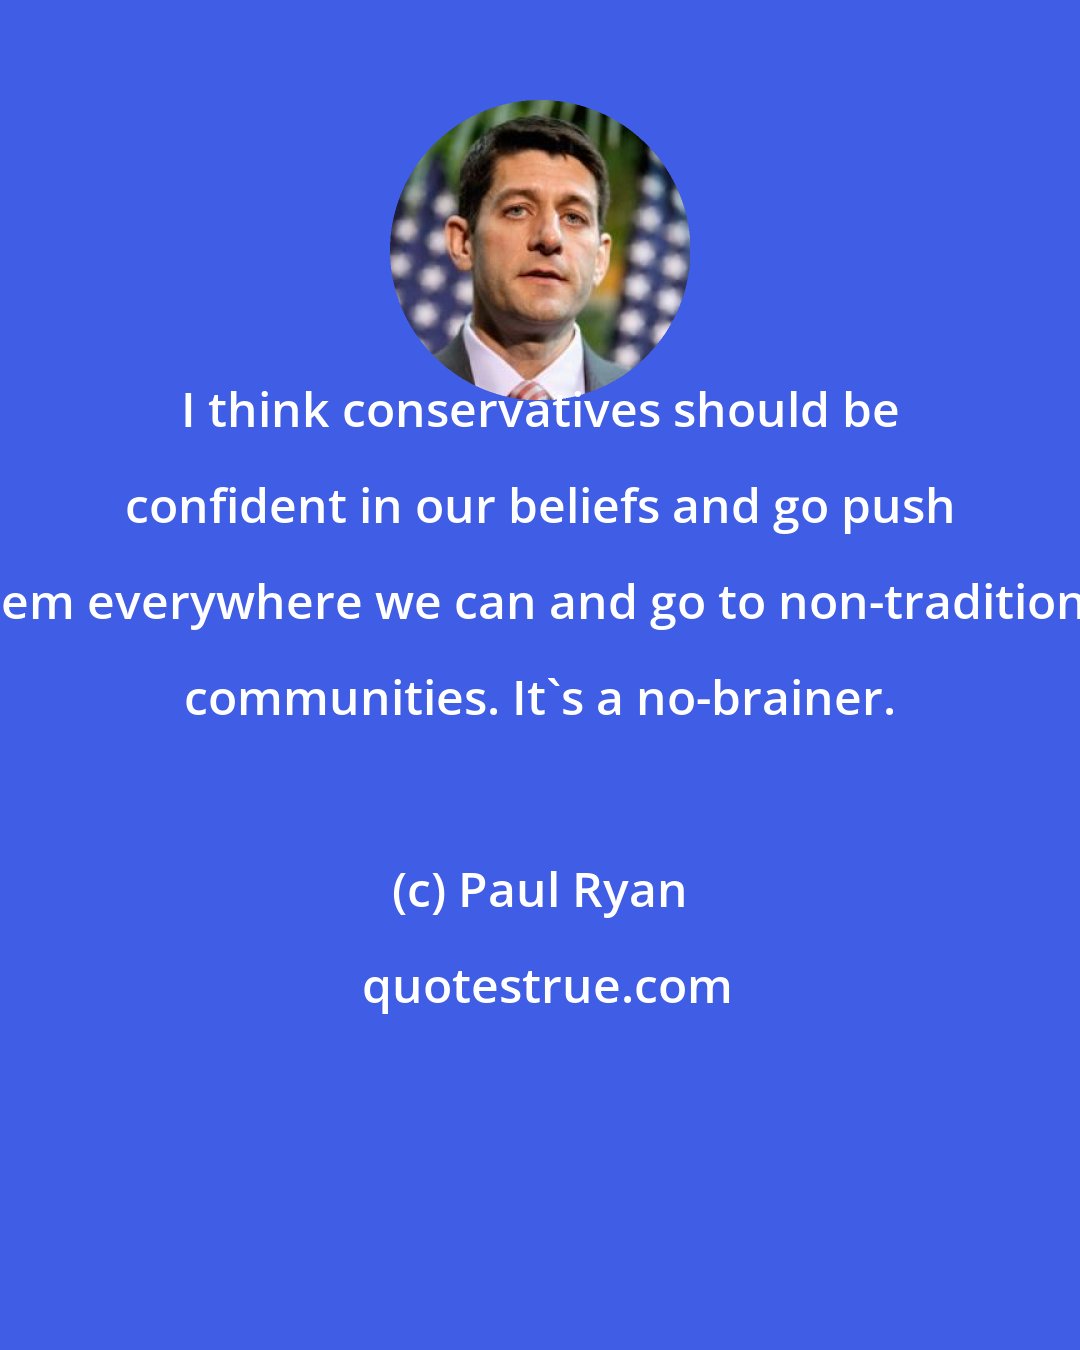 Paul Ryan: I think conservatives should be confident in our beliefs and go push them everywhere we can and go to non-traditional communities. It's a no-brainer.